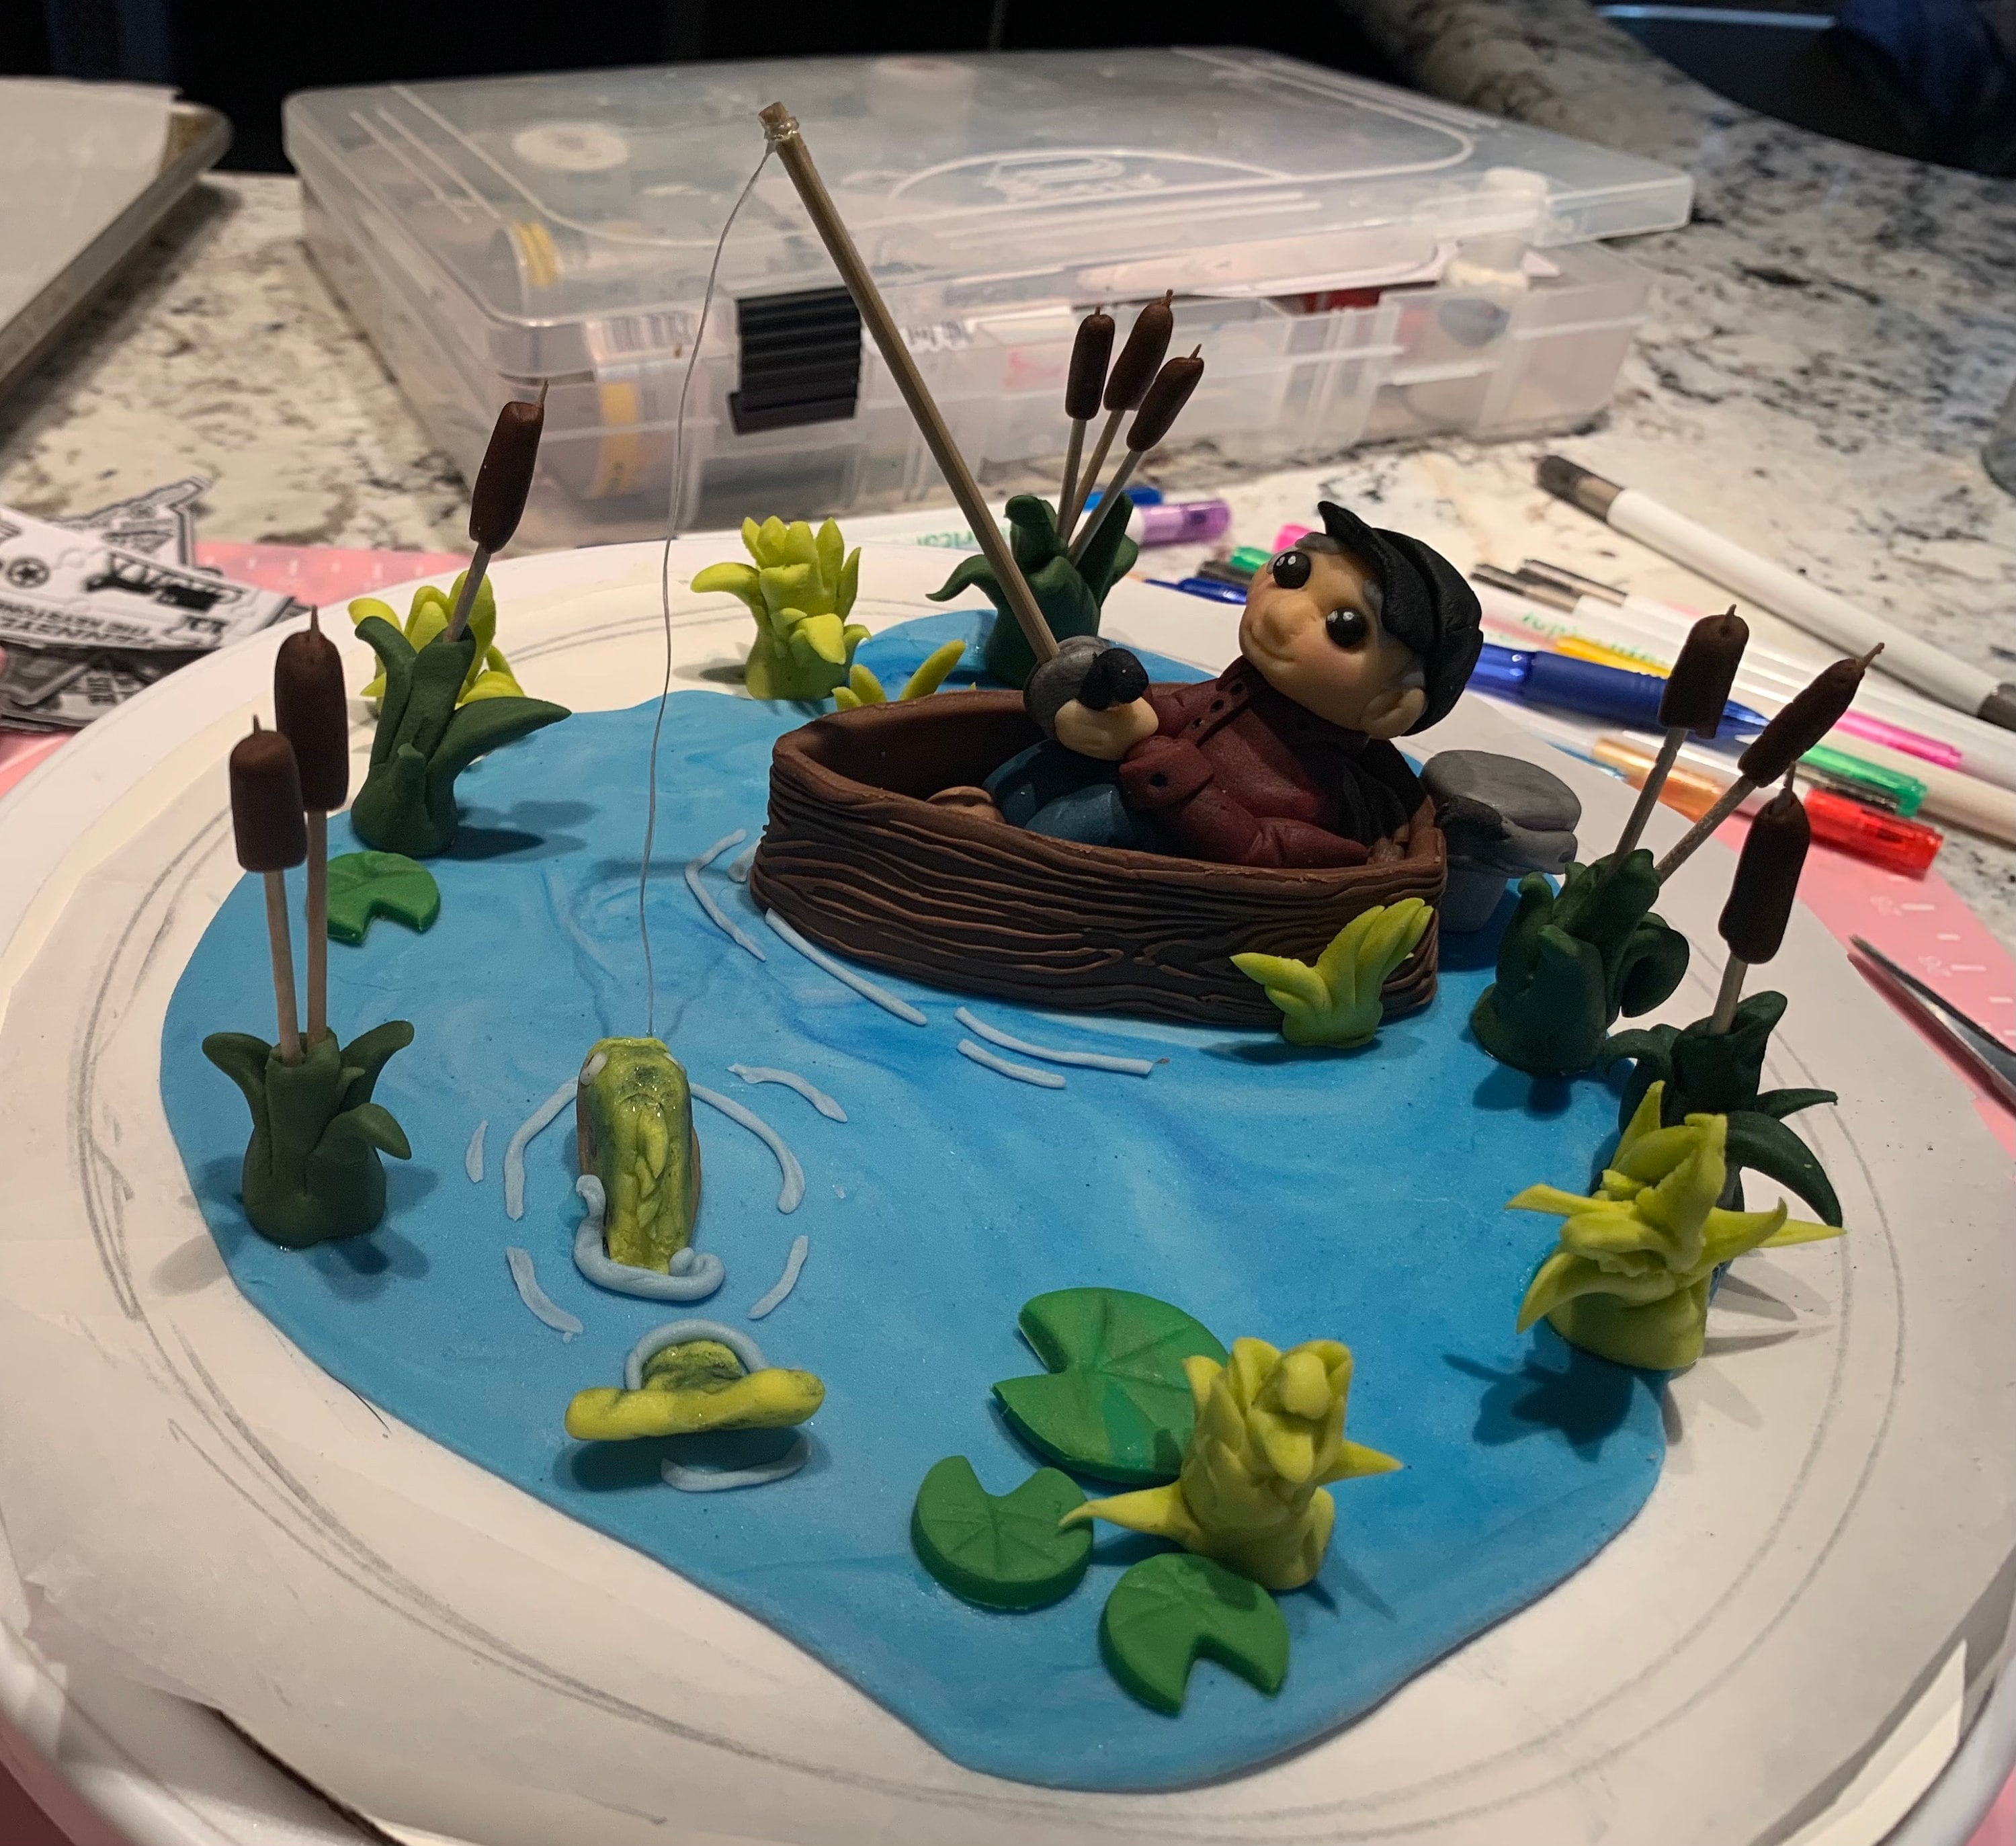 Fishing and Hunting Theme Cake, Fondant Toppers, Hunting, Fishing,  Retirement Cake Topper, Men's Birthday Theme 